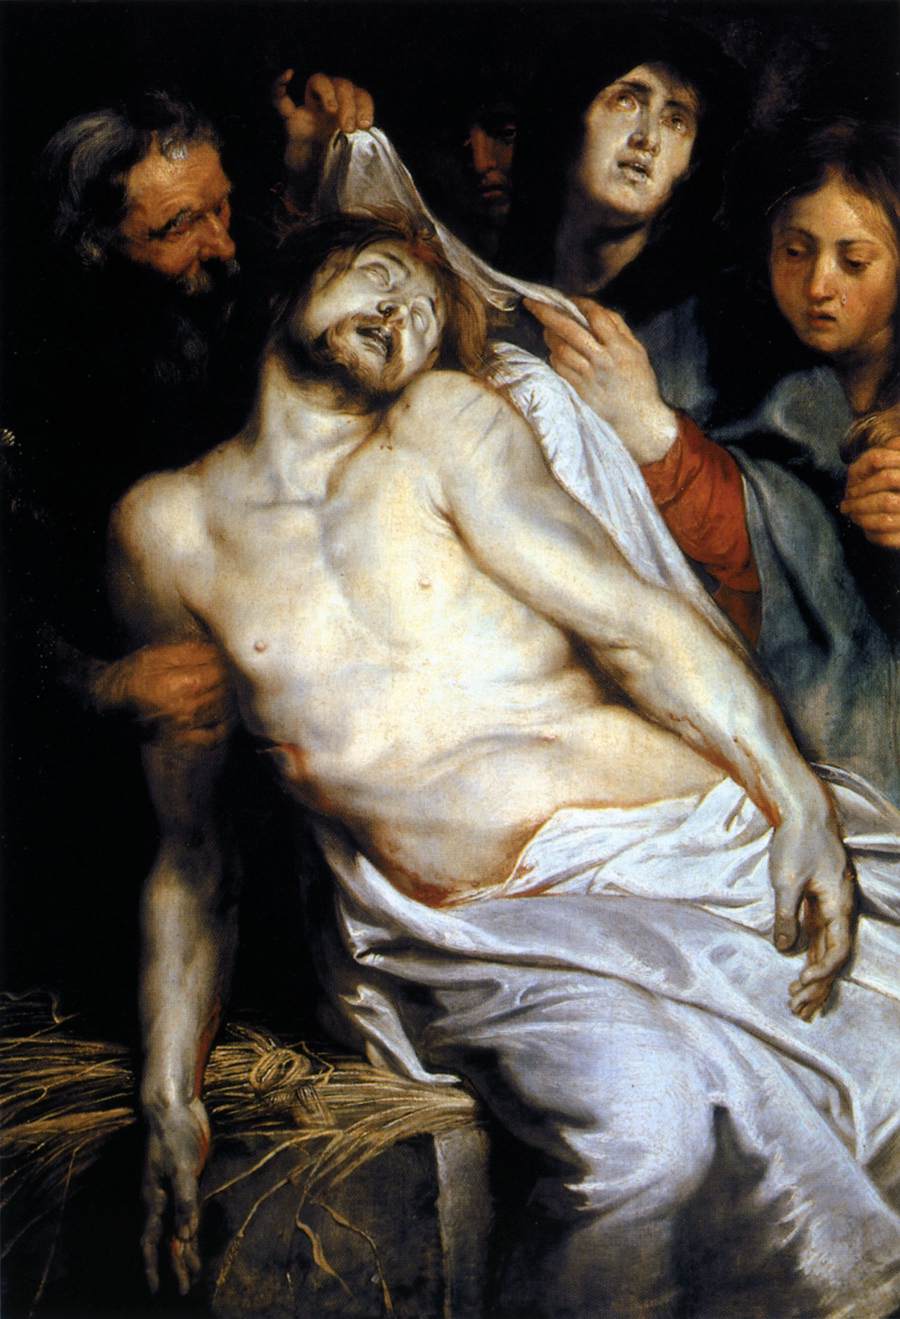 Lamentation (Christ on the Straw) by Peter Paul Rubens Reproduction Oil Painting on Canvas